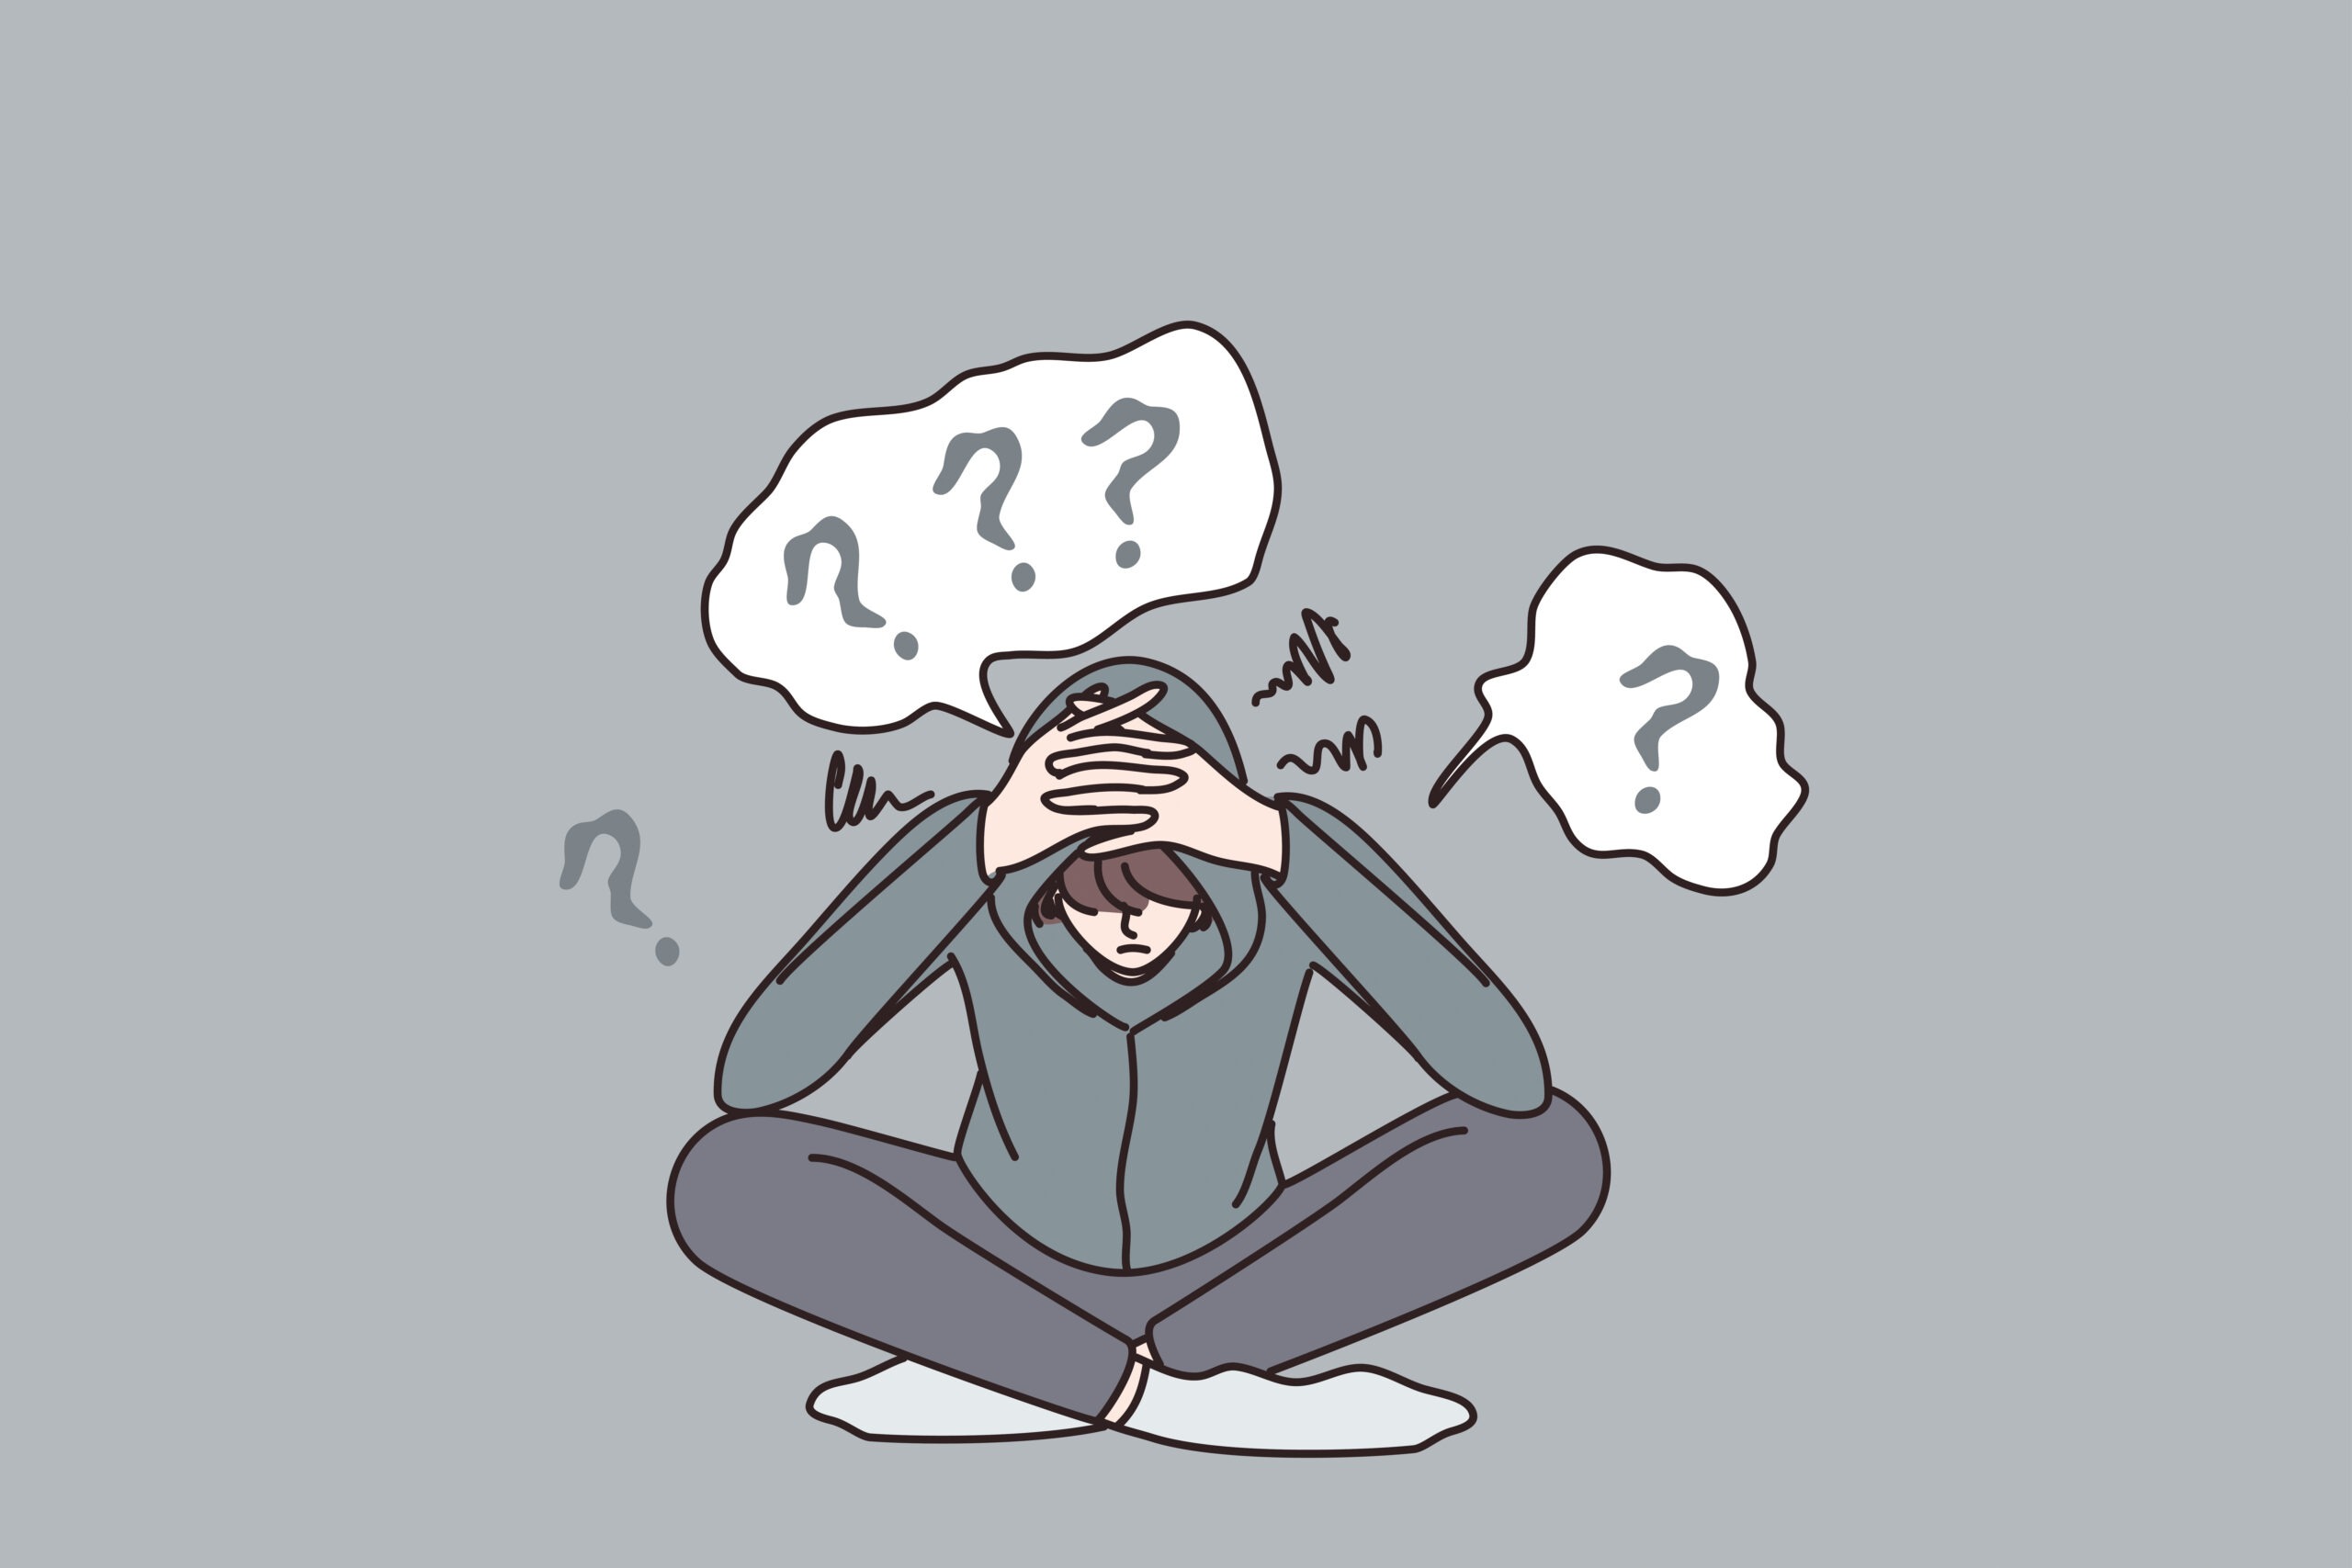 Graphic illustration a person sitting on the floor with their legs crossed. They have a hoodie on with their hand over their head while looking down. There are question marks illustrated all over the person's head.